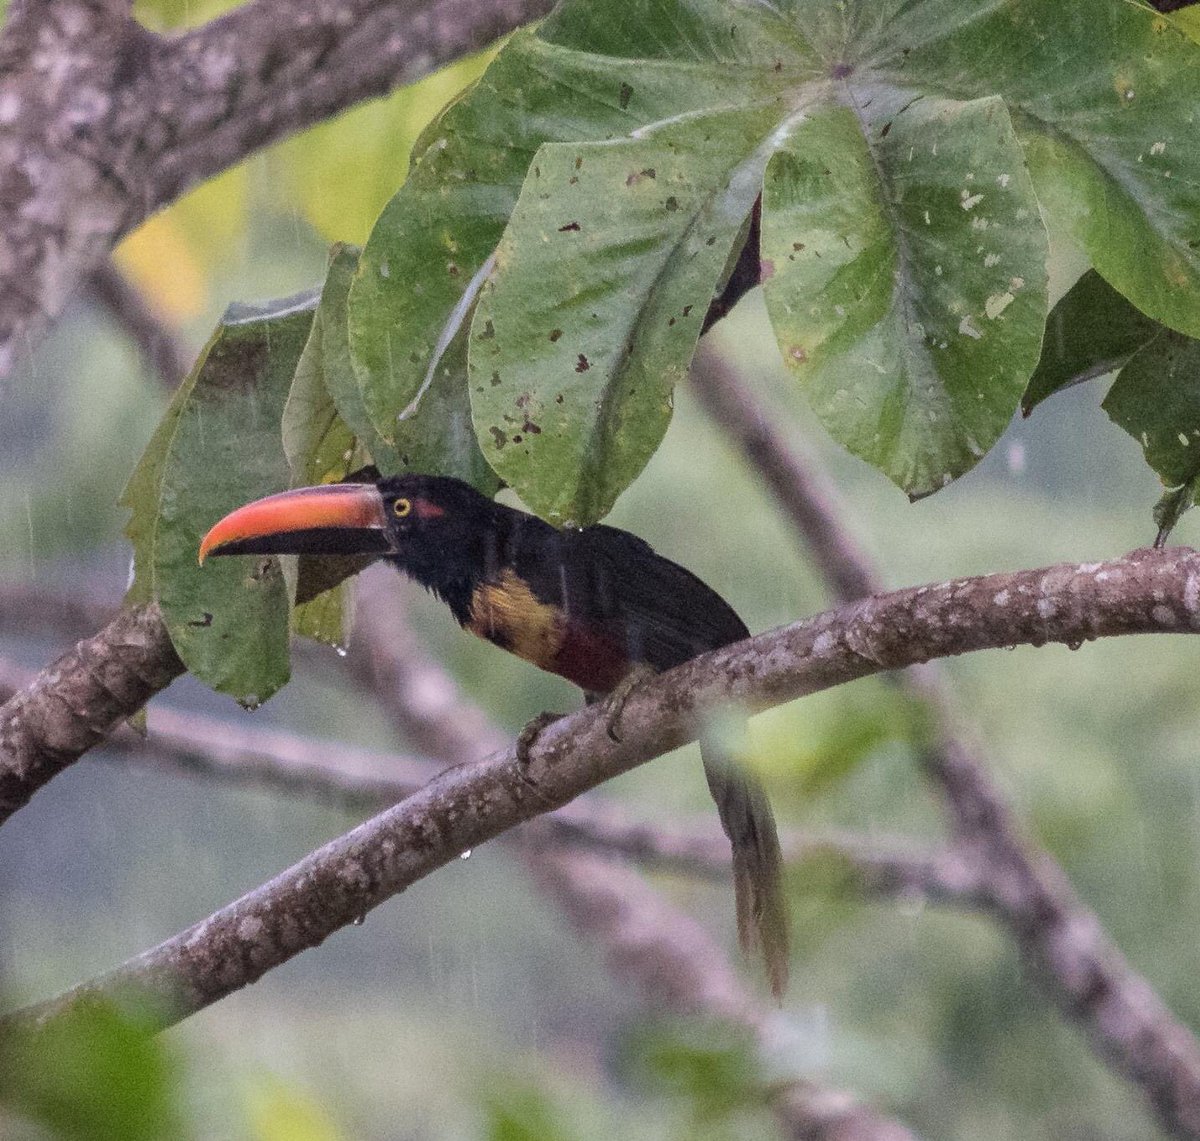 An fiery-billed aracari waiting out a rainstorm under a cecropia leaf. Aracaris are basically small toucans. Their larger cousin, the black mandibled toucan, also liked the cecropia trees